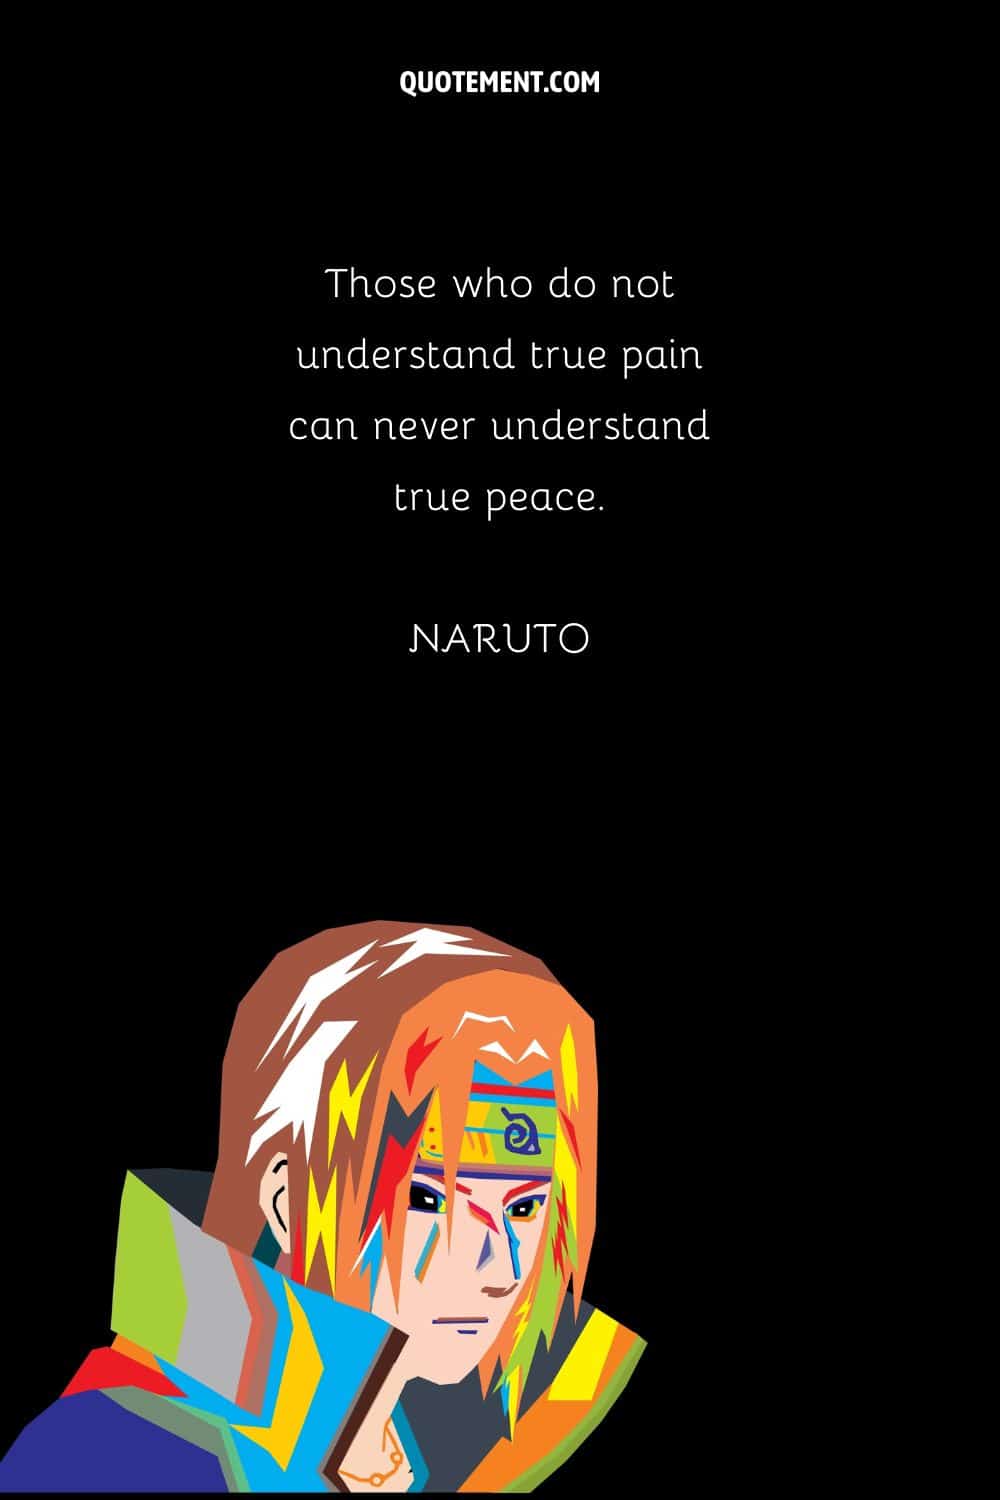 “Those who do not understand true pain can never understand true peace.” — Naruto